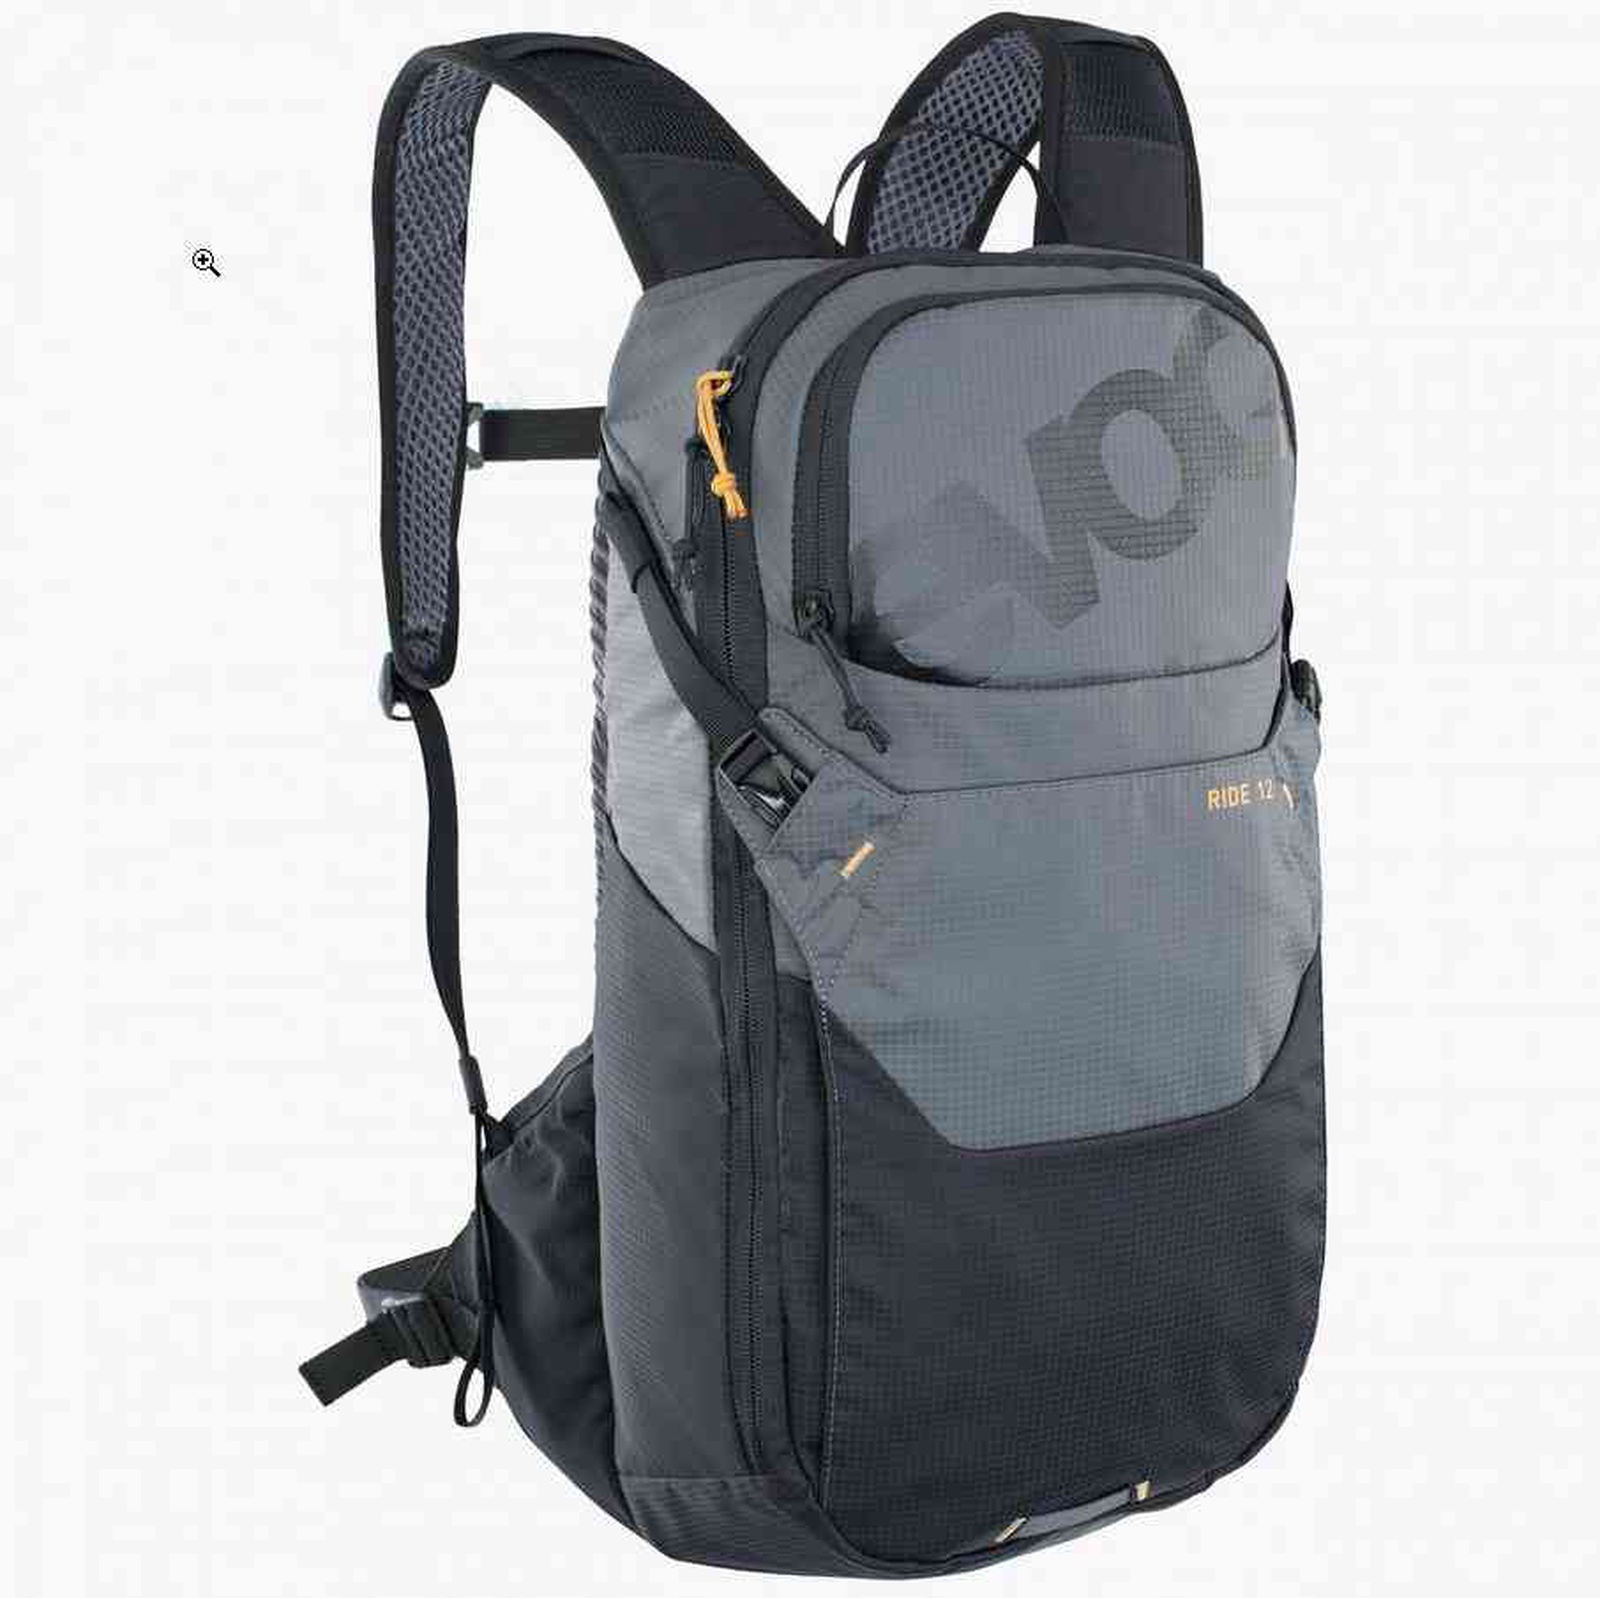 Ride 12L Backpack